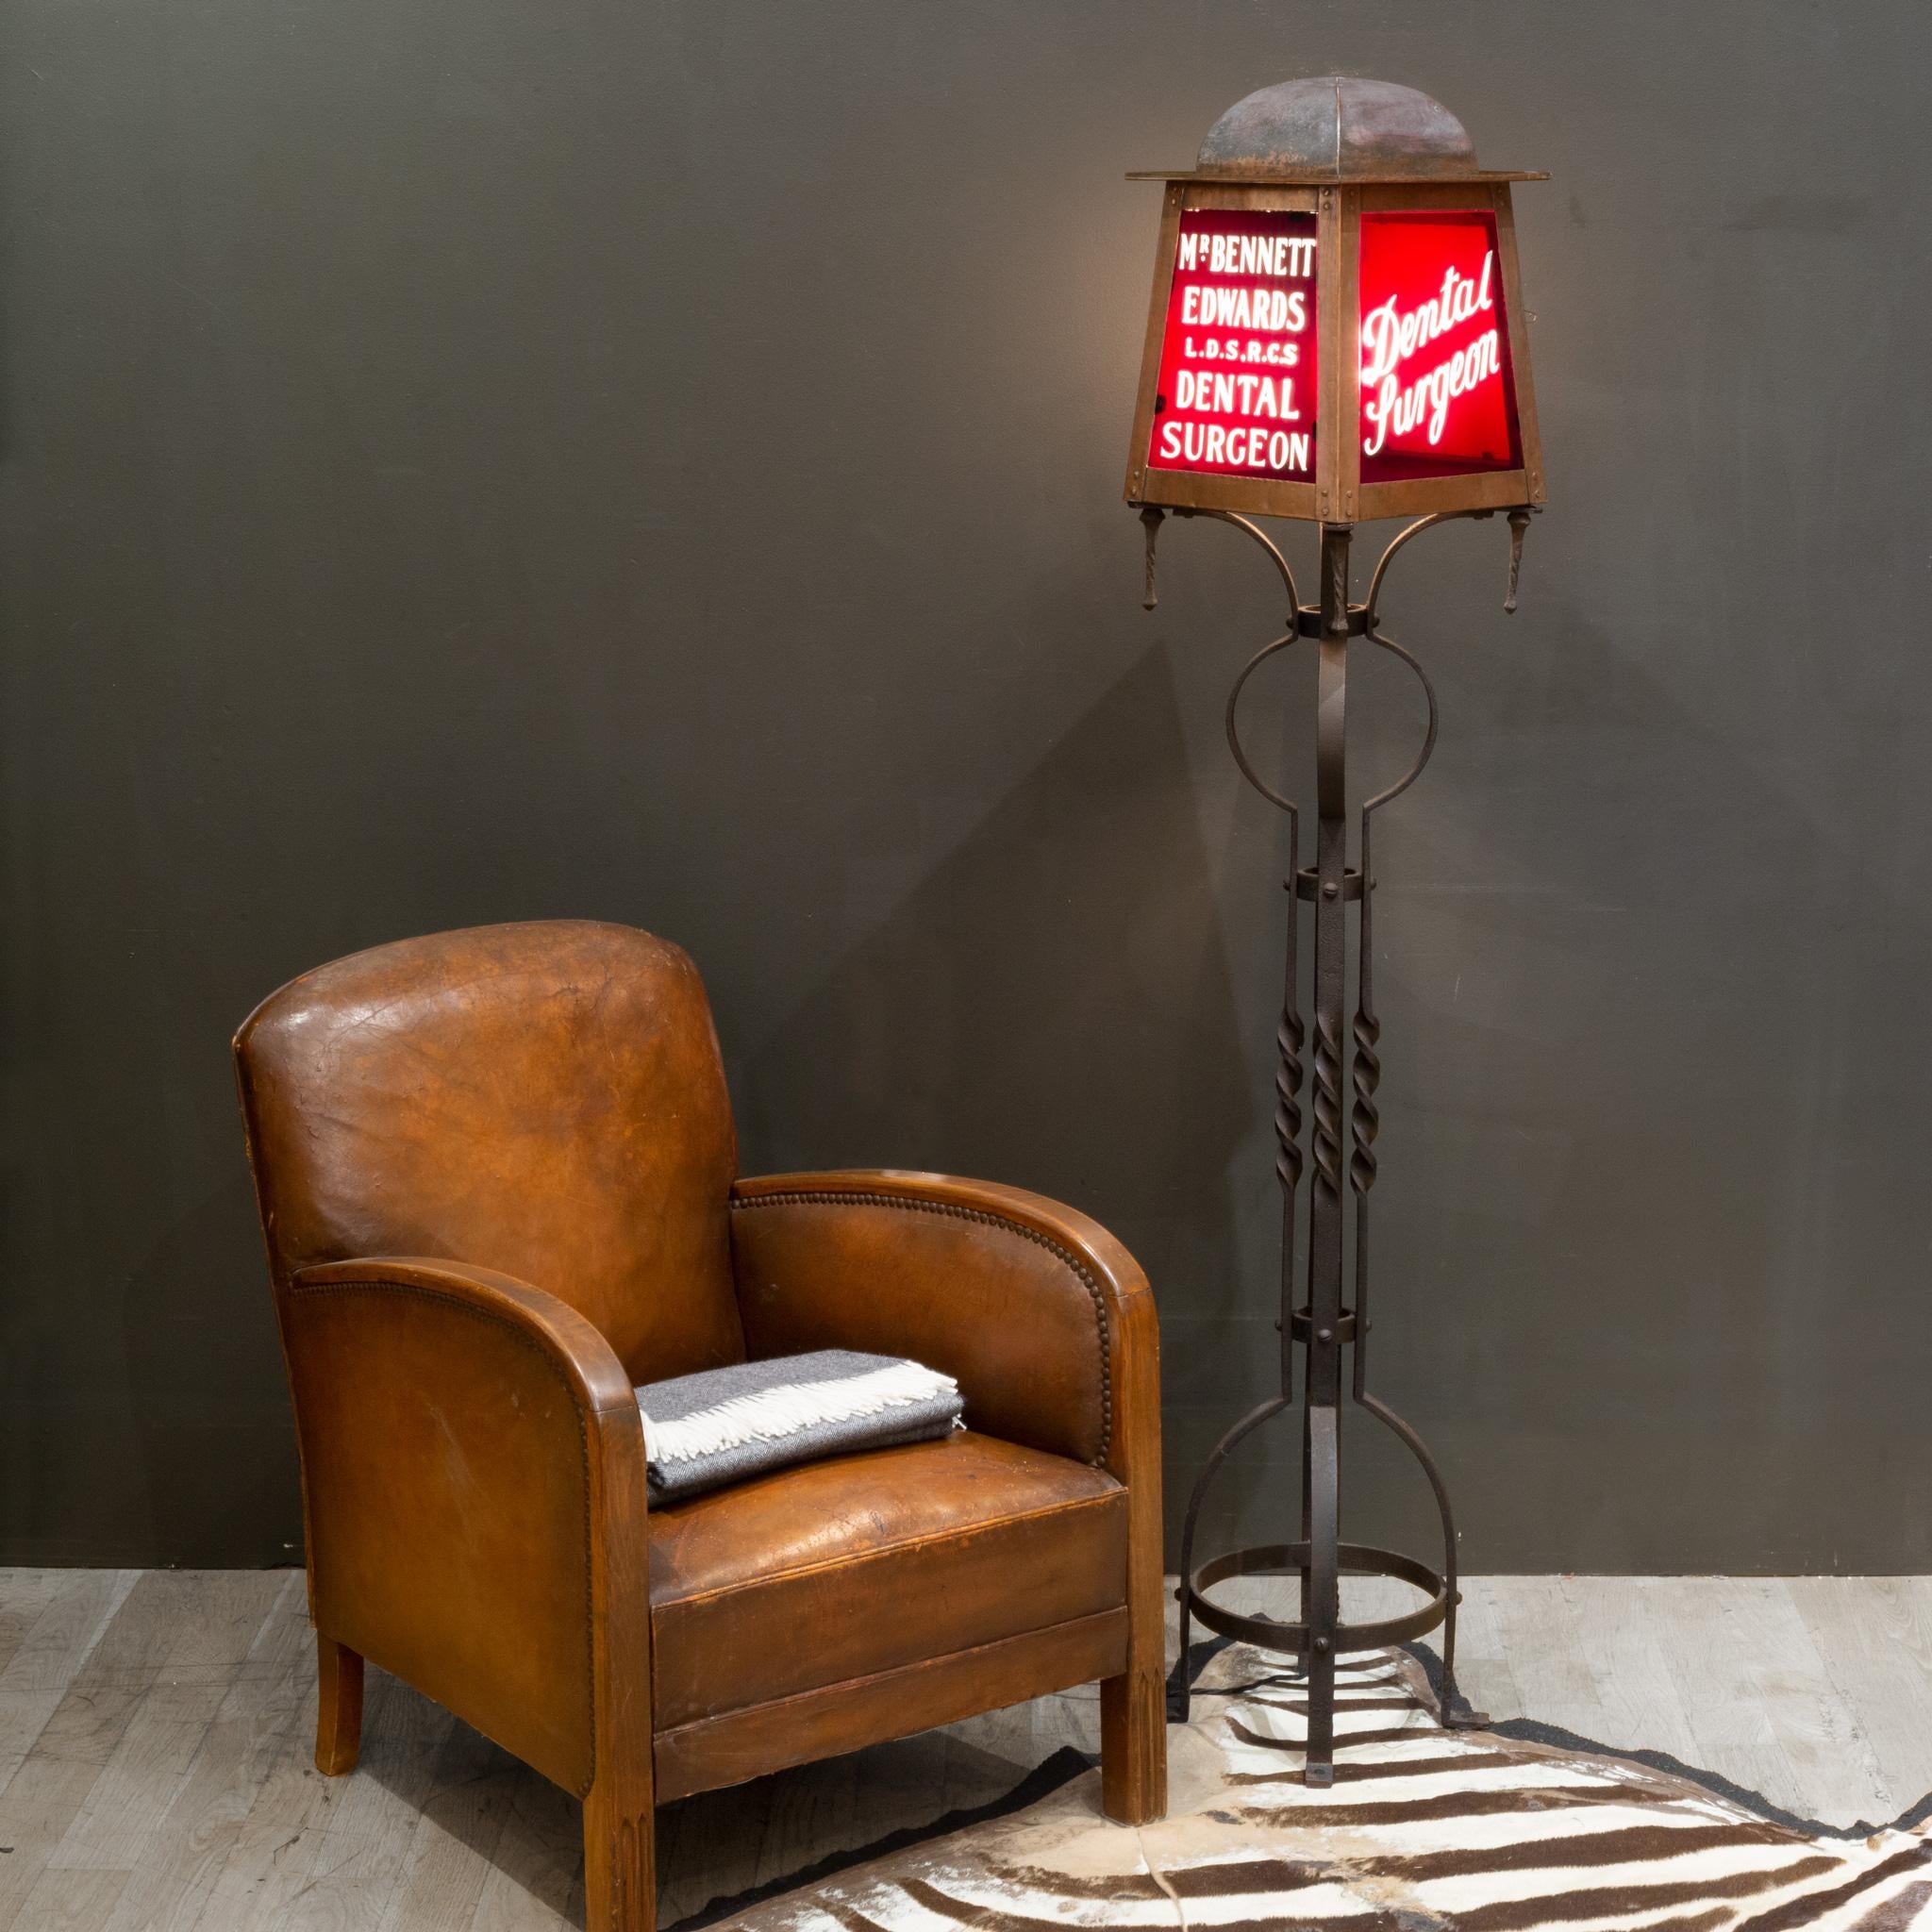 ABOUT

Contact us for more shipping options: S16 Home San Francisco. 

A 19th century English dental surgeon copper floor lamp. This lamp would have originally been a gas light and used outside the front door of the dental surgery of Mr. Bennett